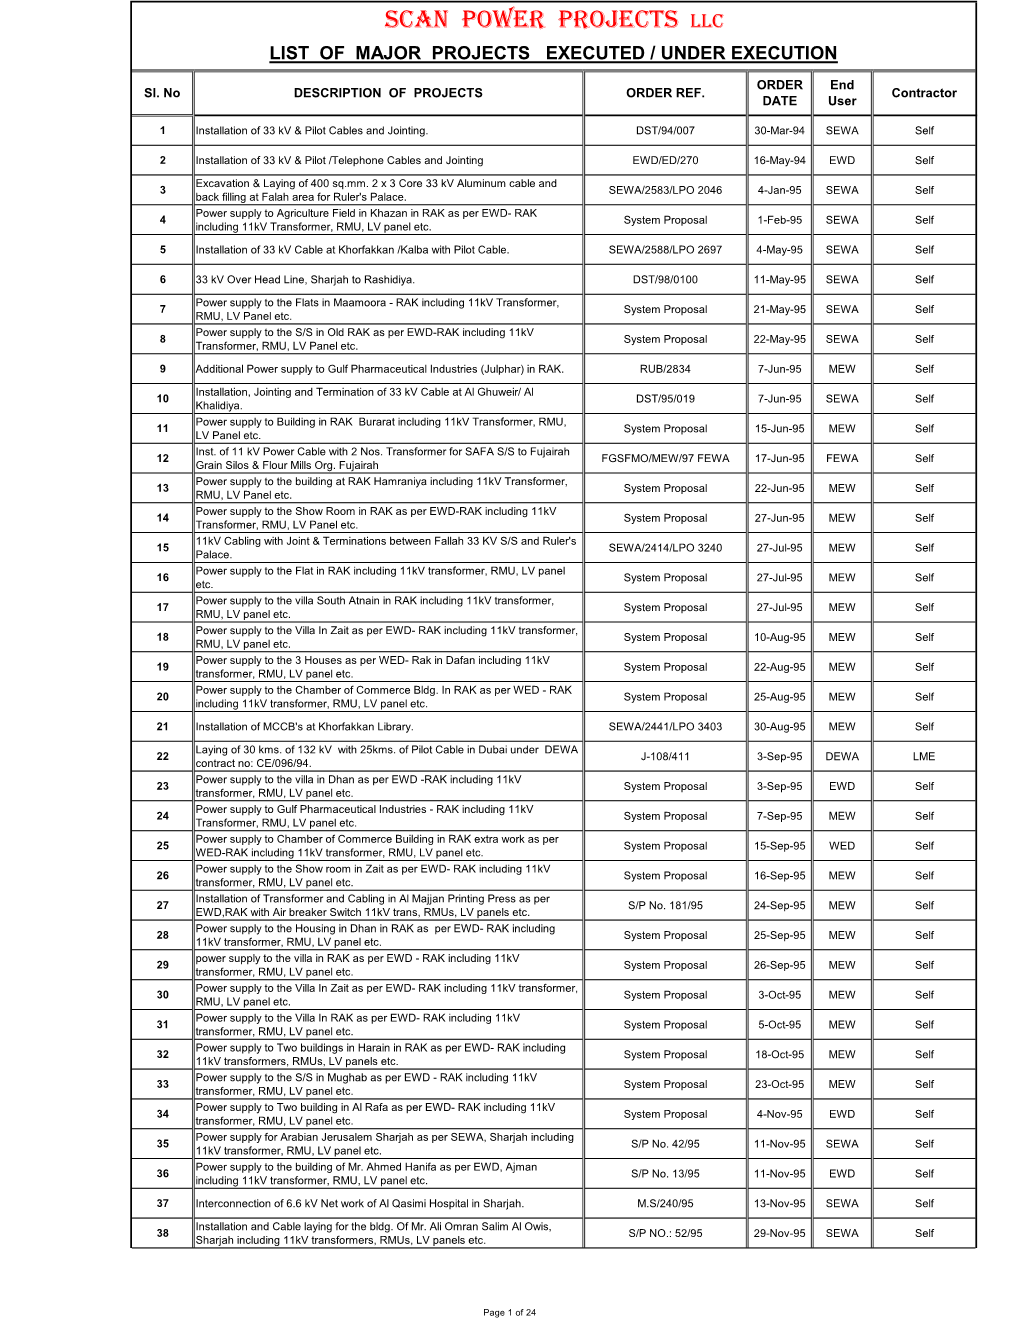 Scan Power Projects Llc List of Major Projects Executed / Under Execution